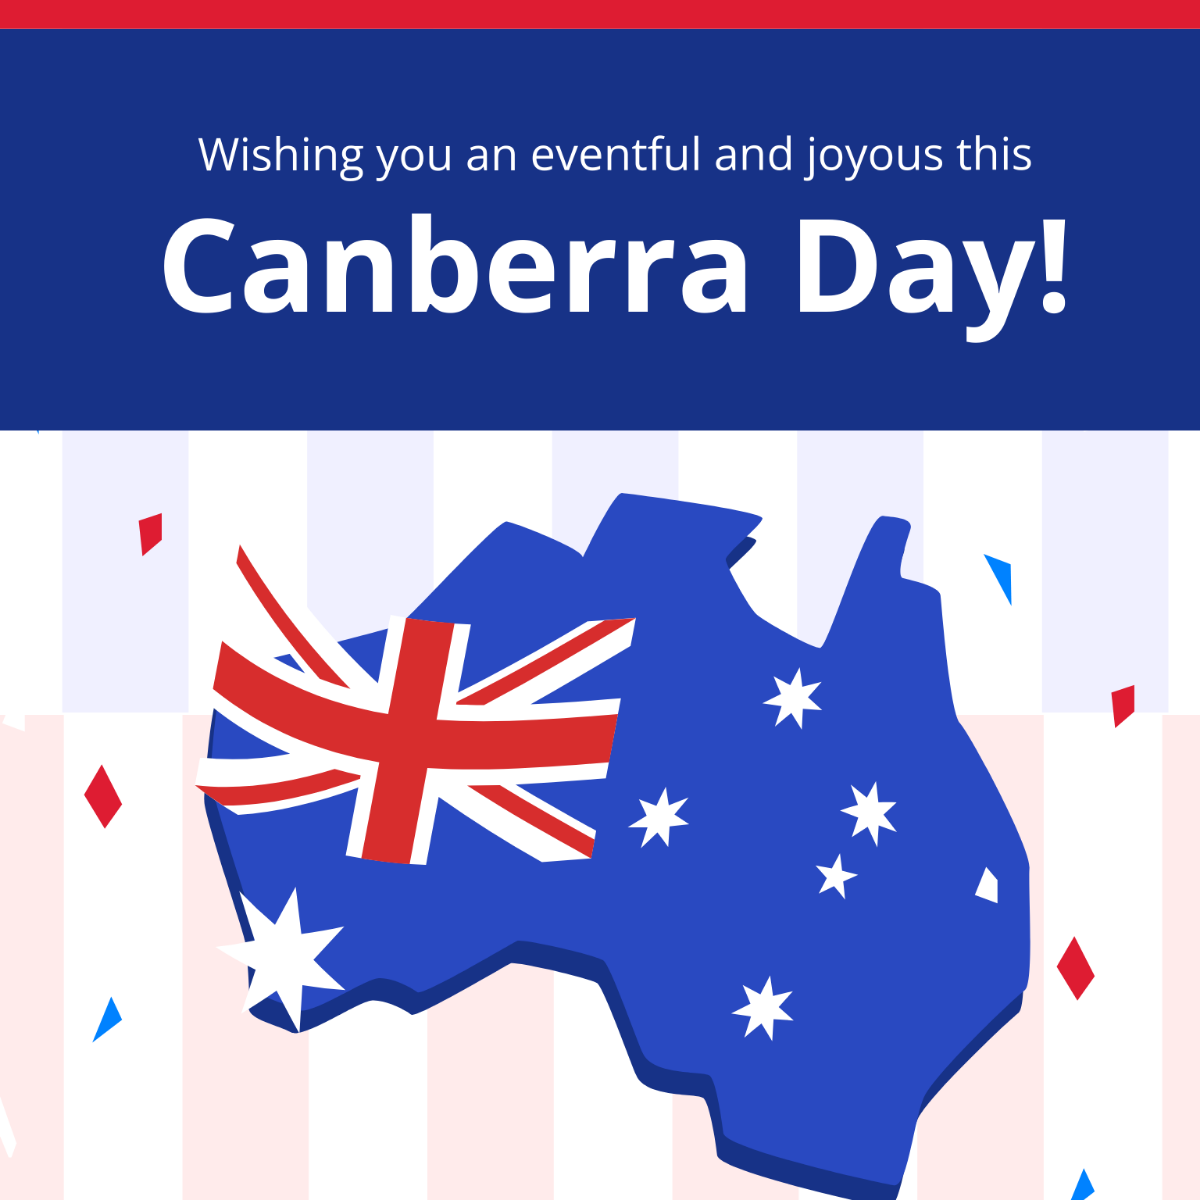 Canberra Day Wishes Vector Template